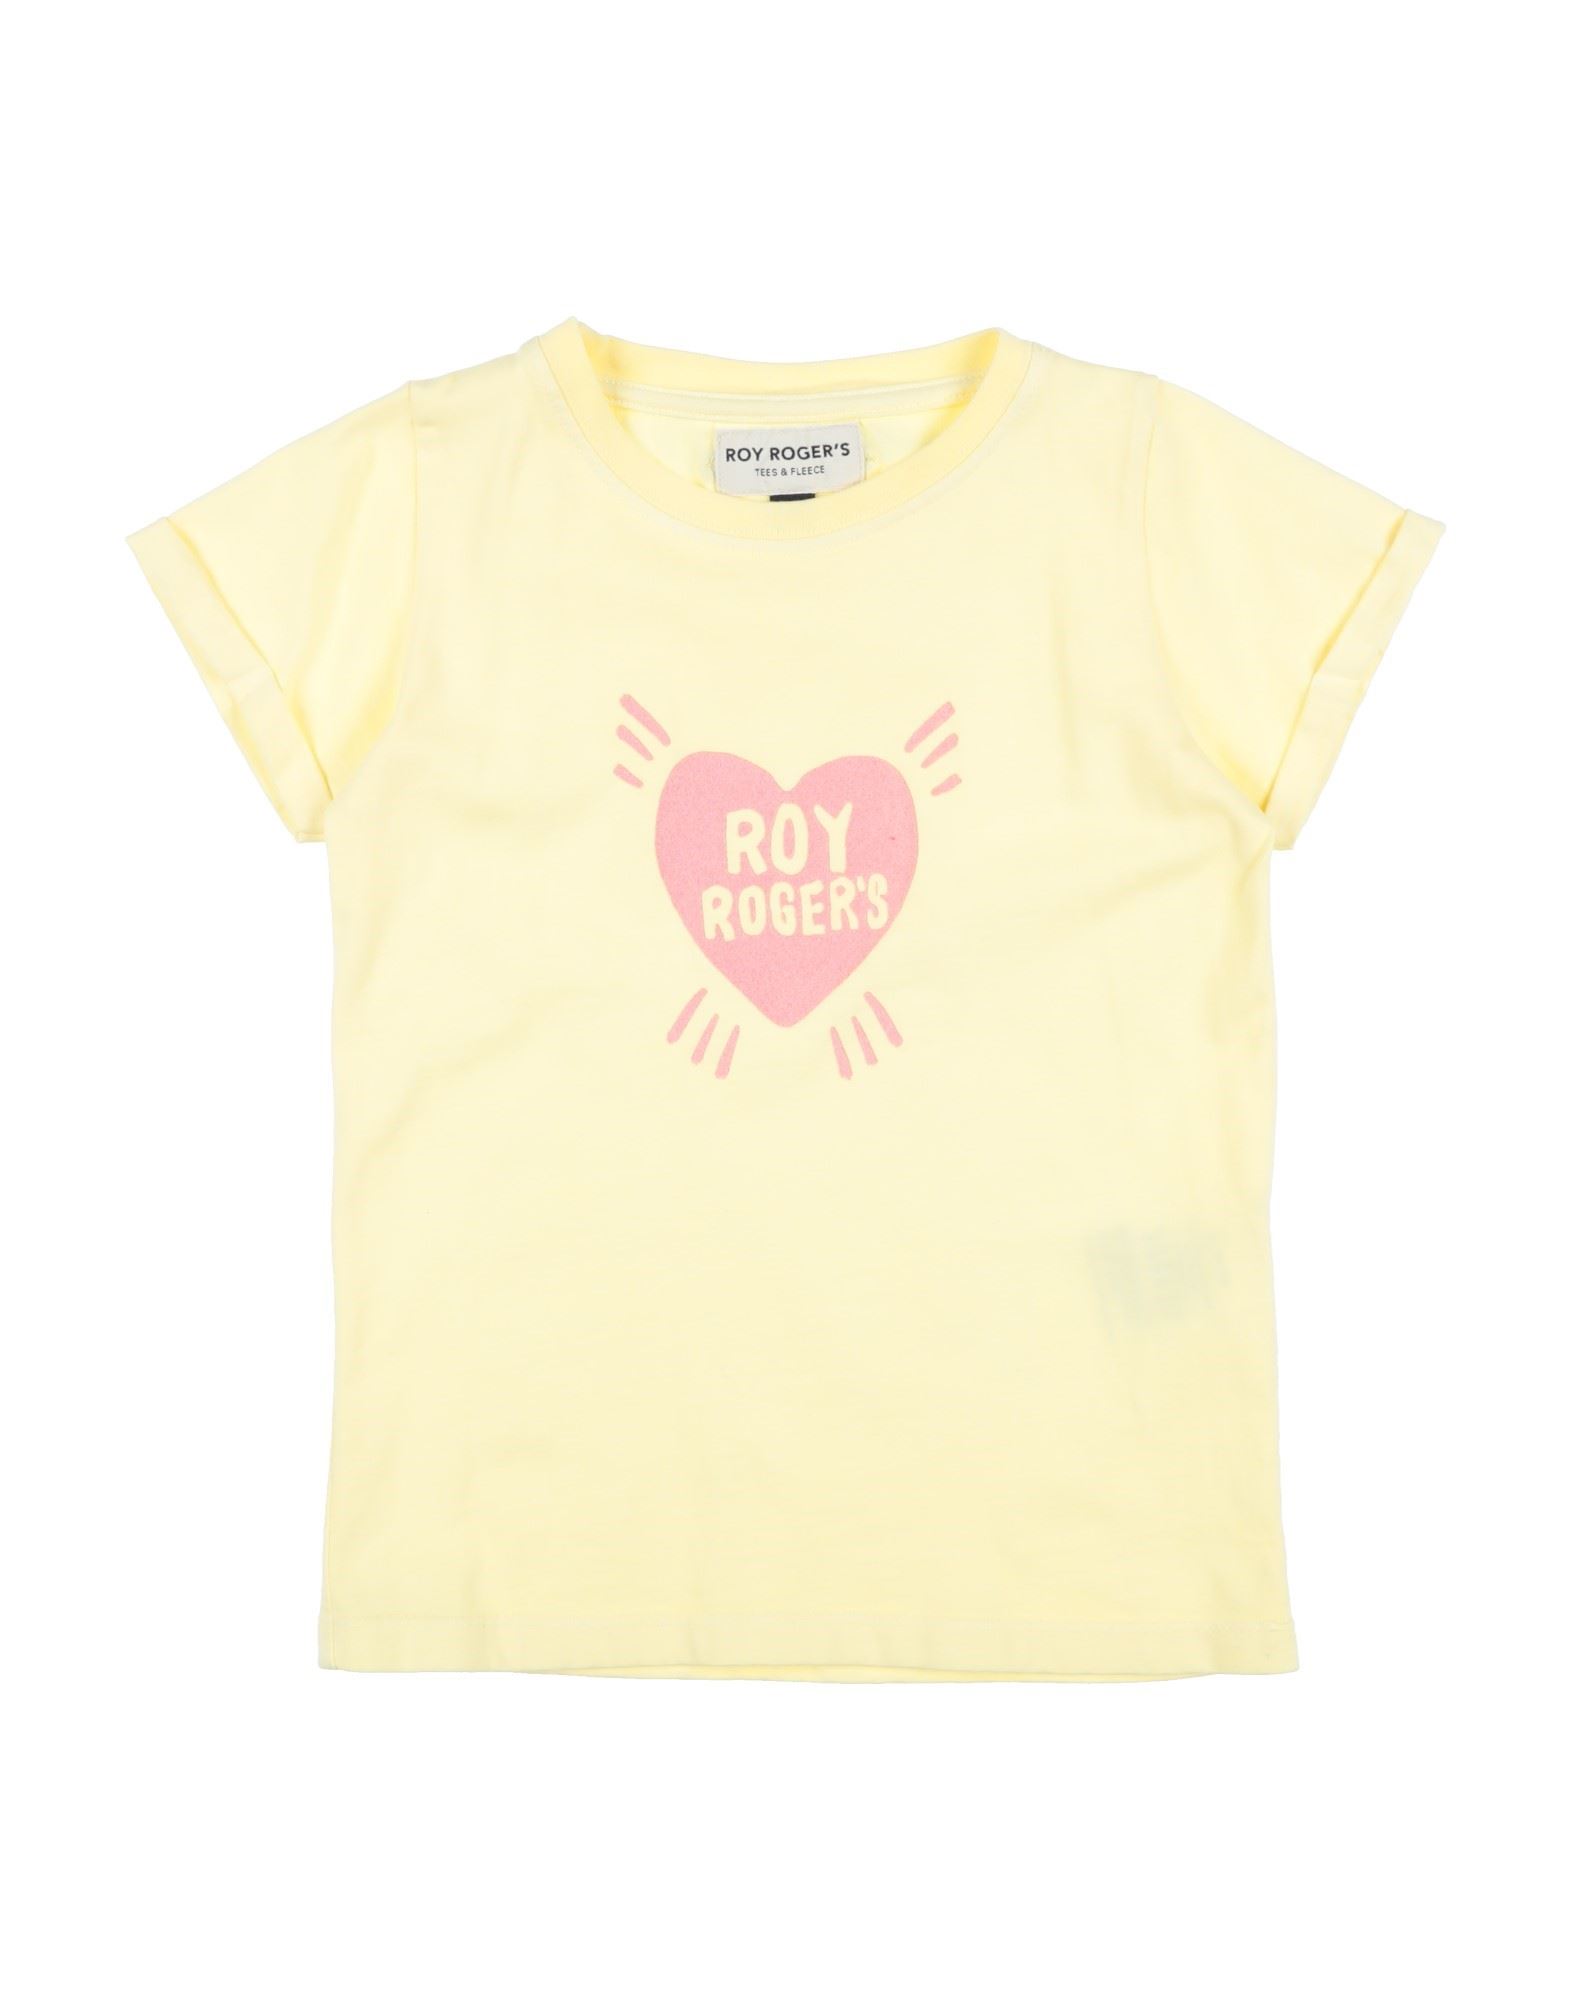 Roy Rogers Kids' Roÿ Roger's Toddler Girl T-shirt Yellow Size 4 Cotton